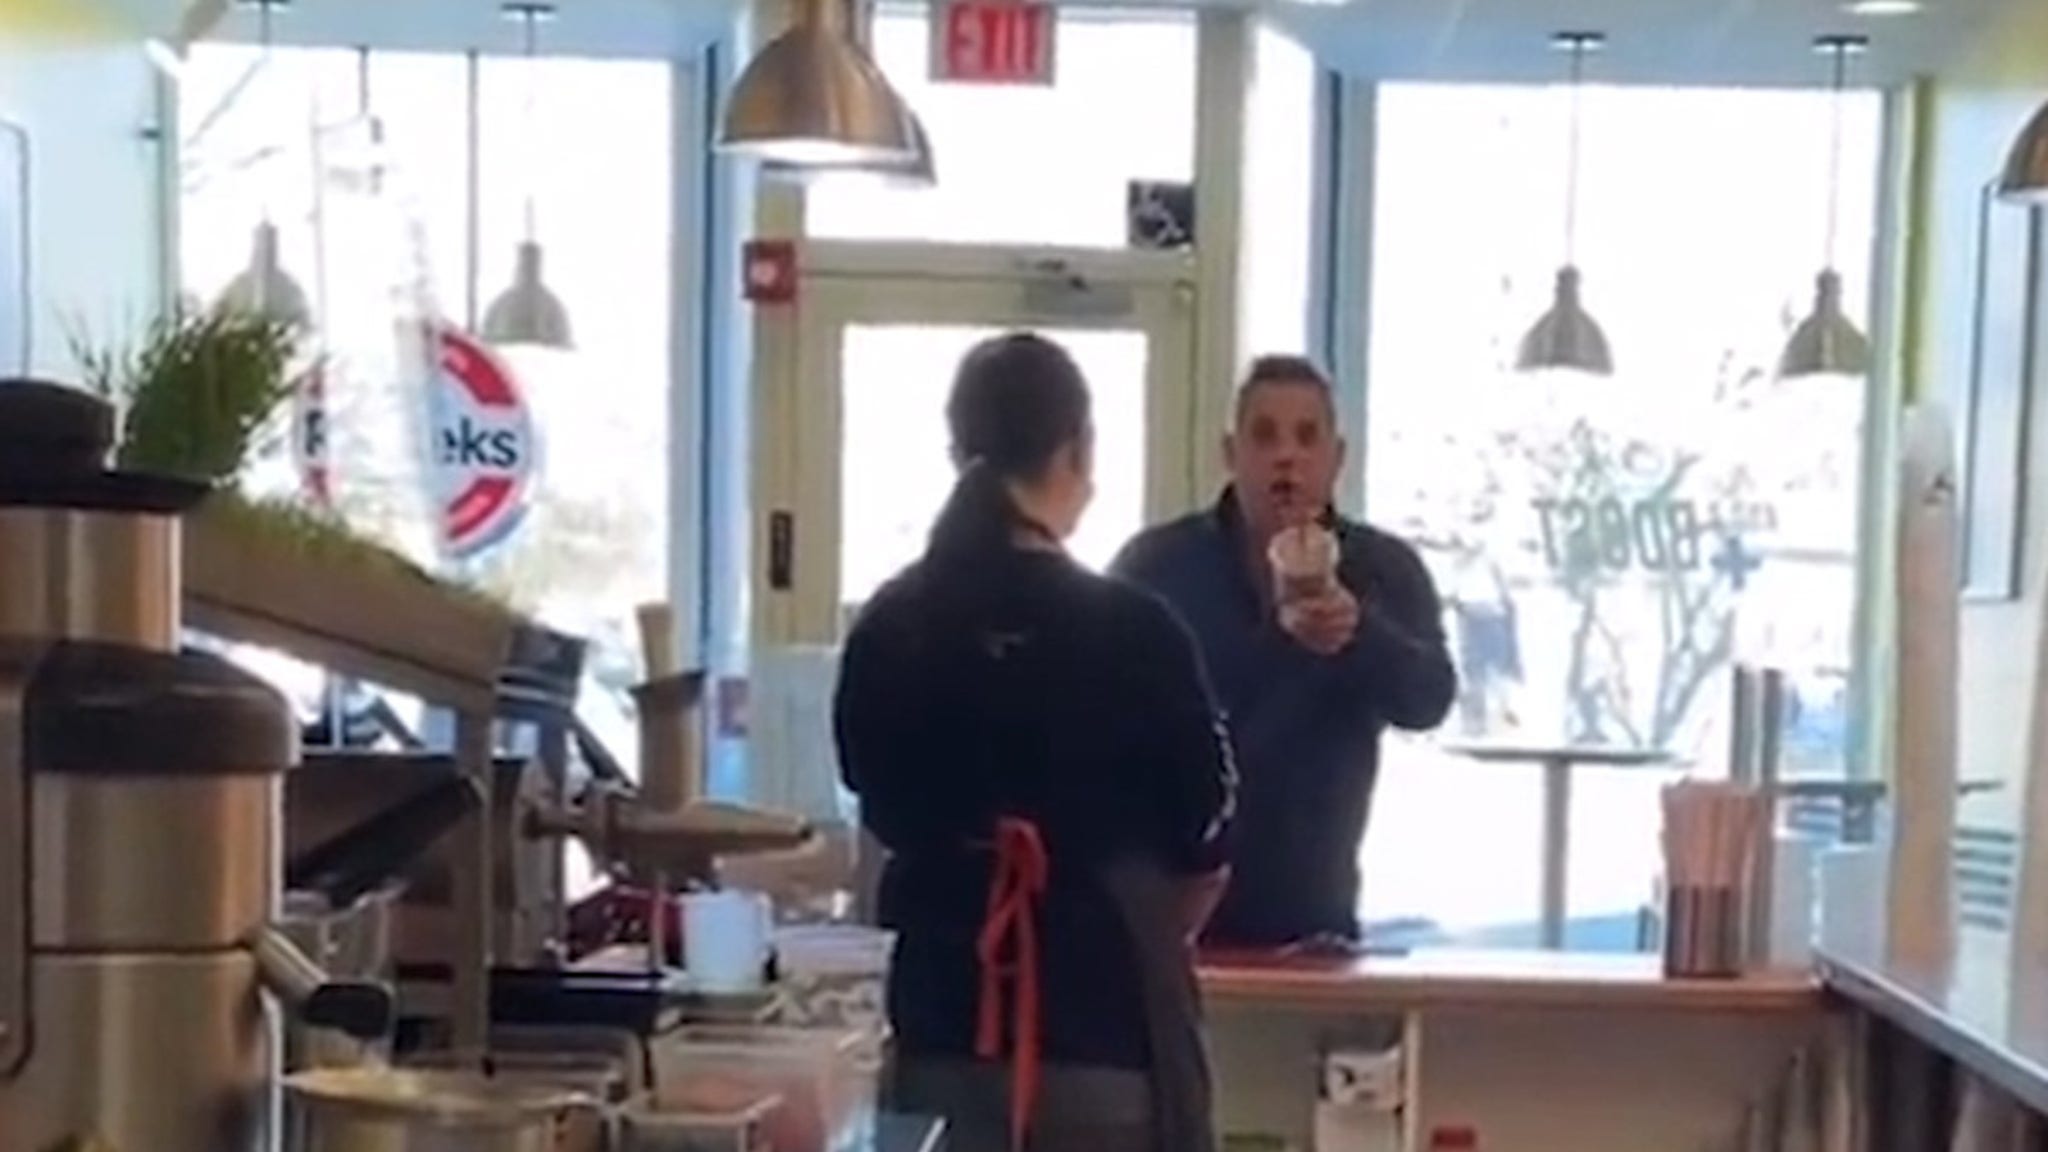 Man Arrested After Racist Tirade, Attack at Connecticut Smoothie Store thumbnail